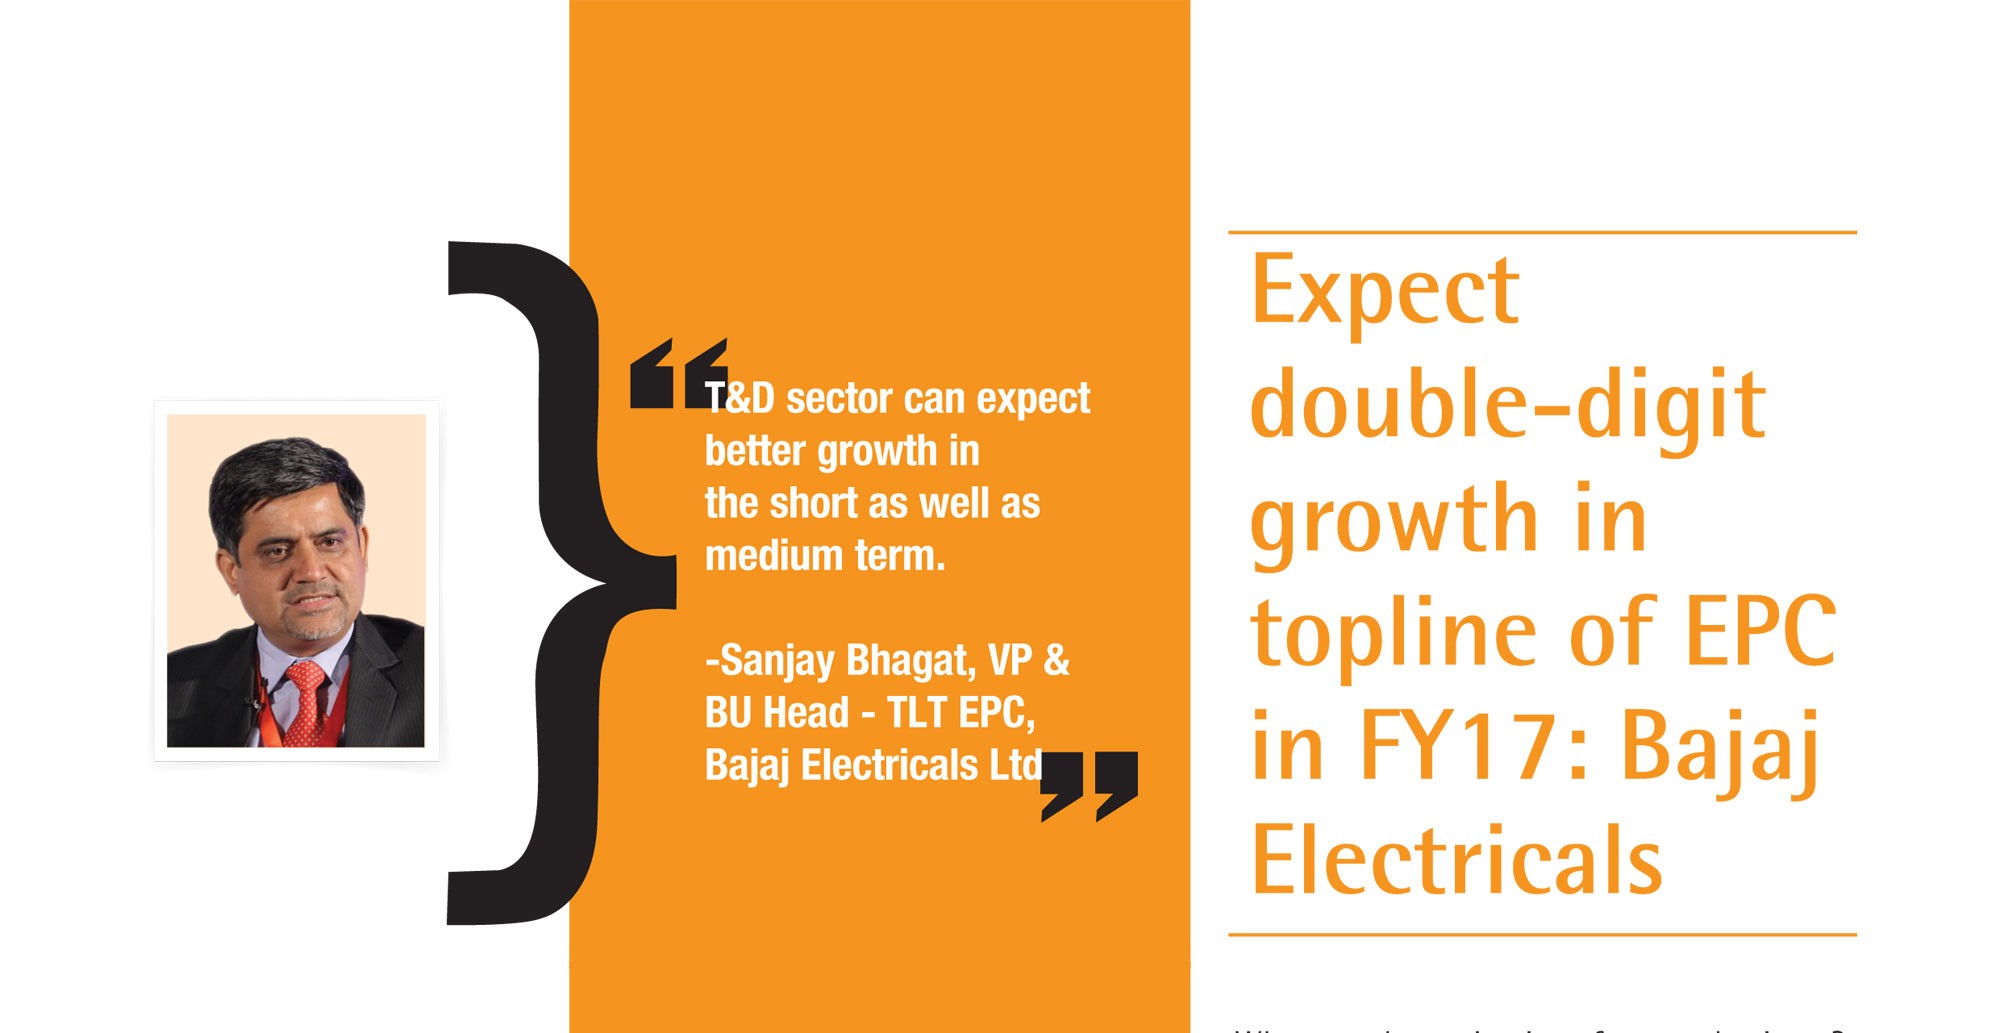 Expect double-digit growth in topline of EPC in FY17: Bajaj Electricals